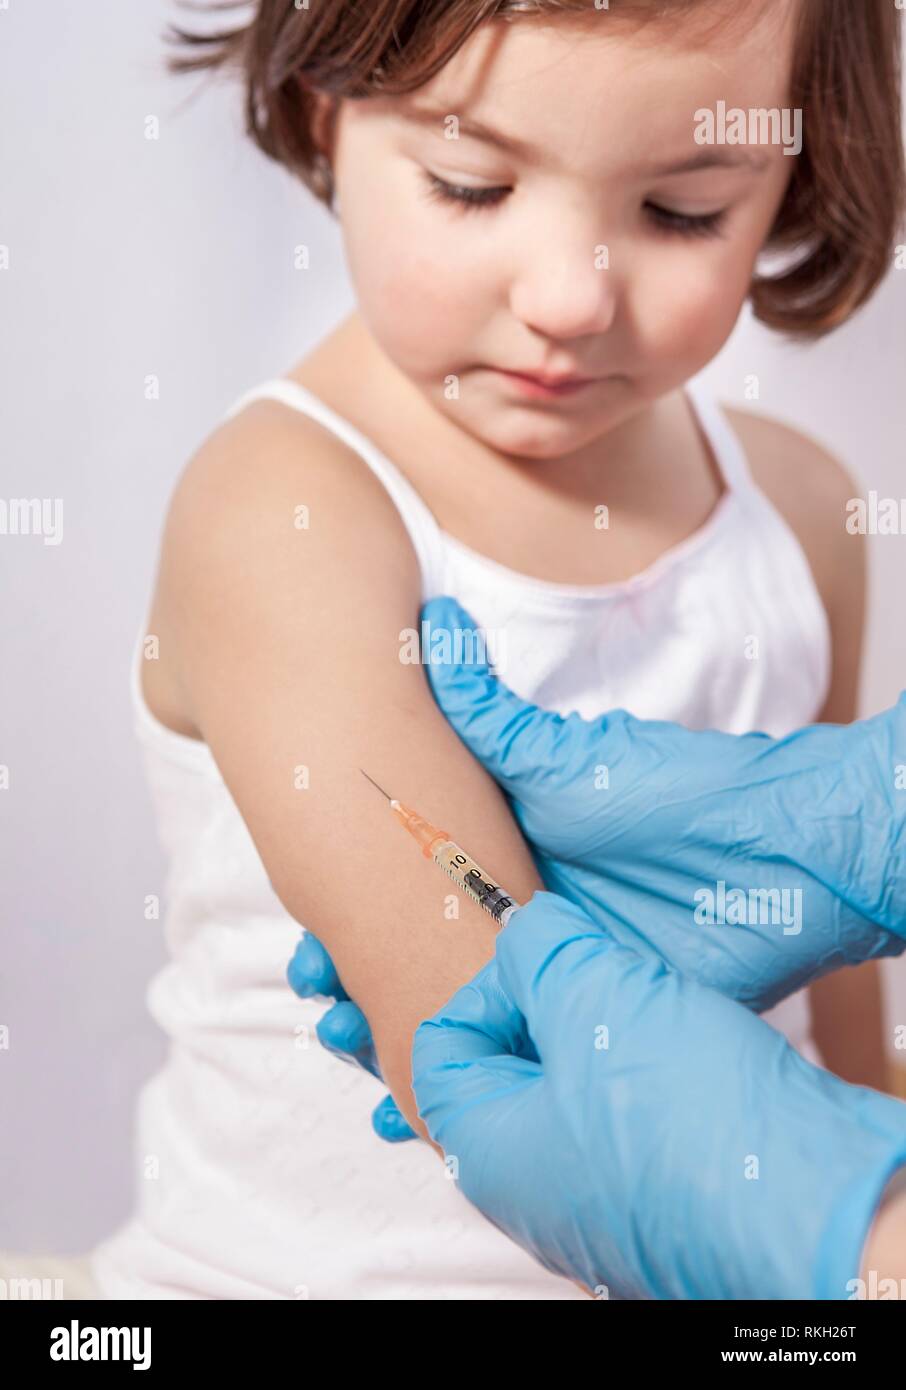 Nurse vaccinating 3 years old little girl. She is relaxed and trusting. Stock Photo